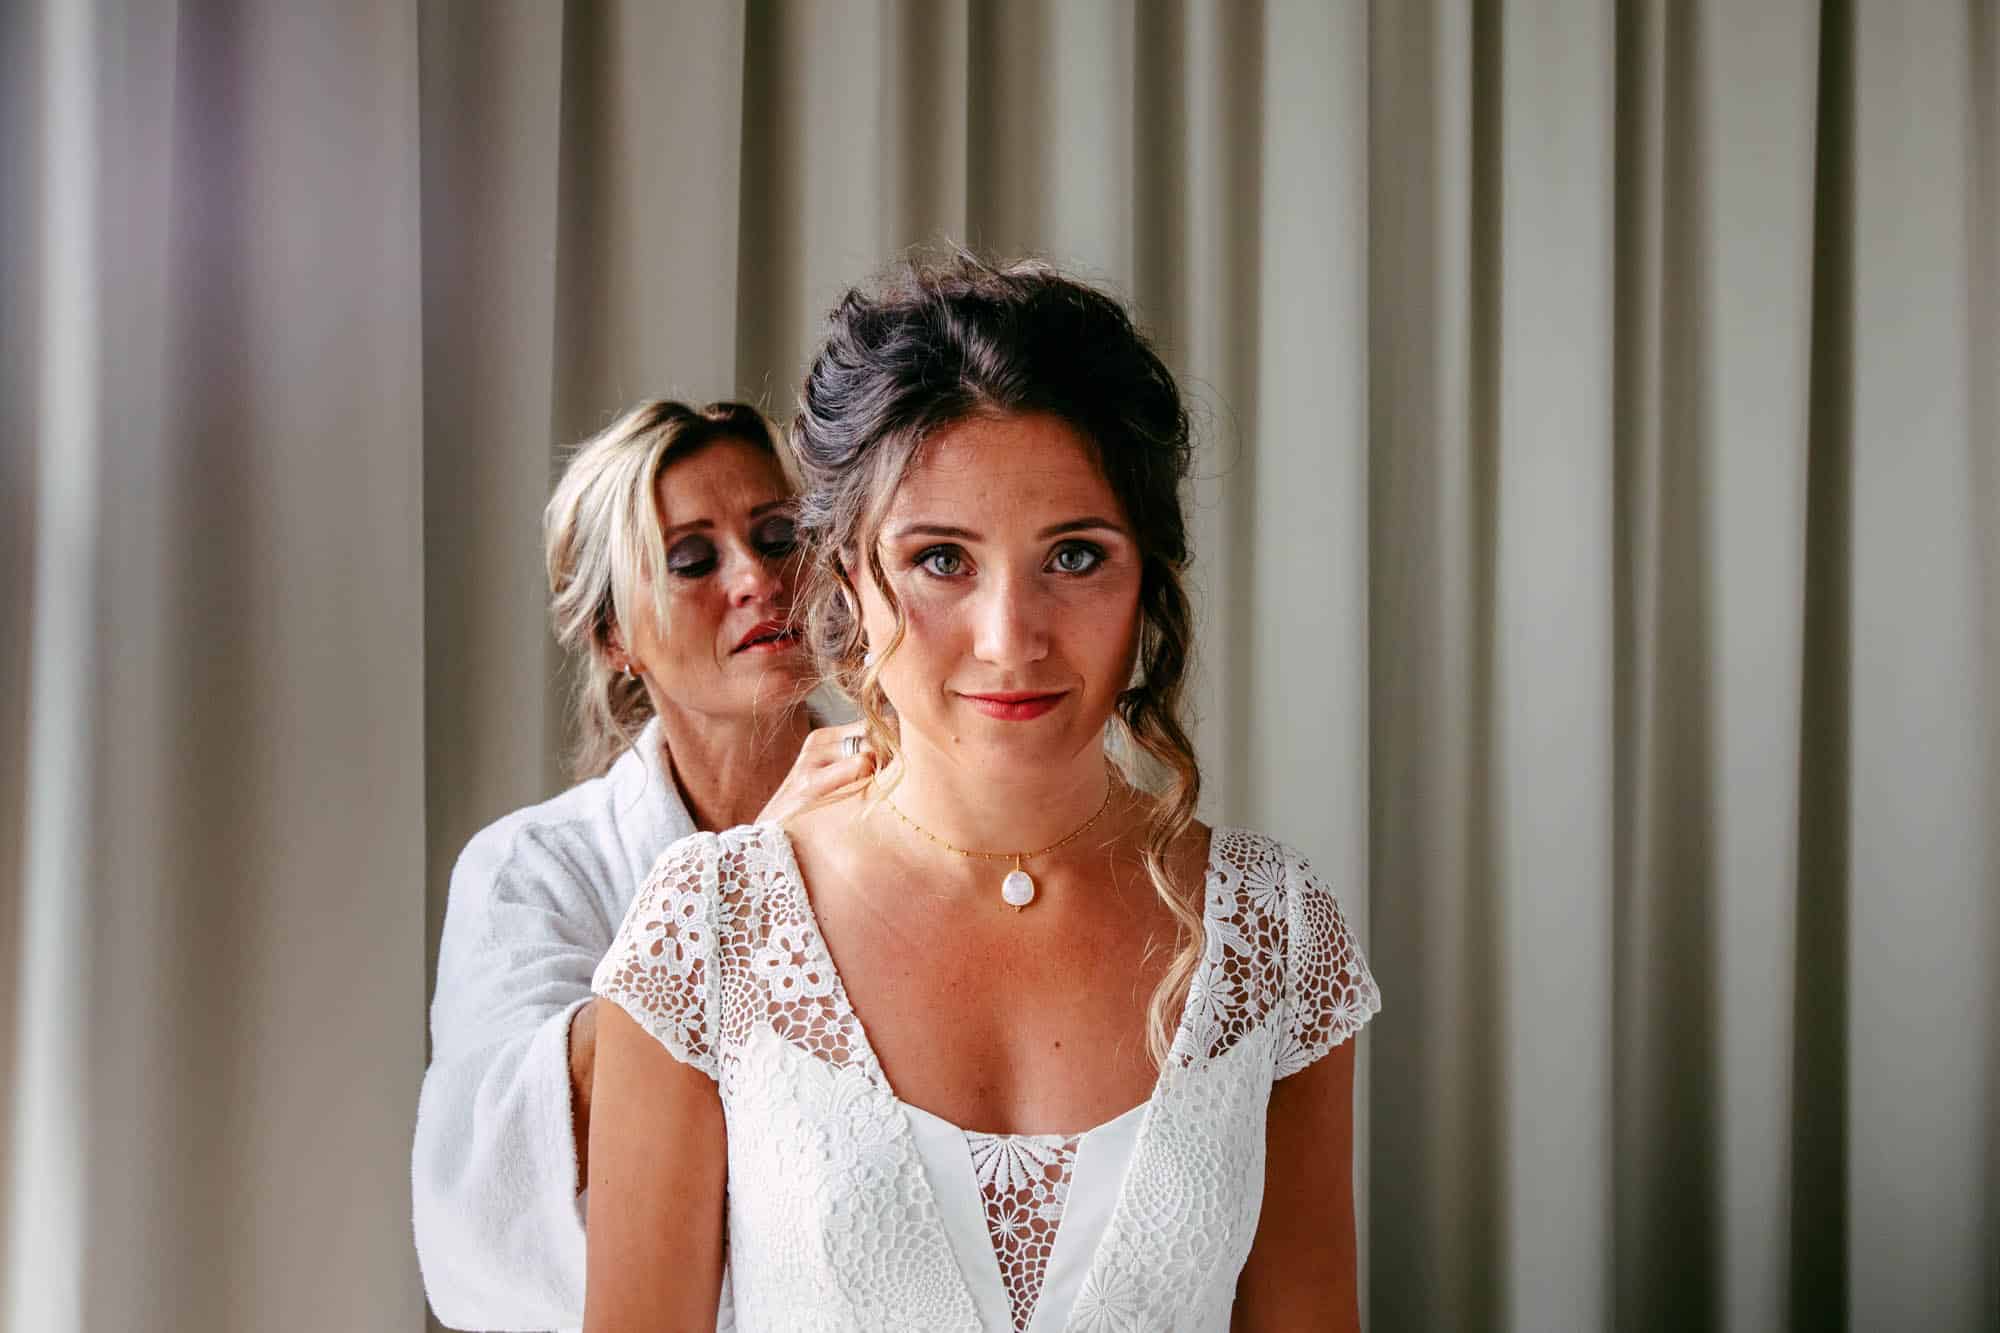 A bride gets ready for her wedding in her bohemian wedding dress.